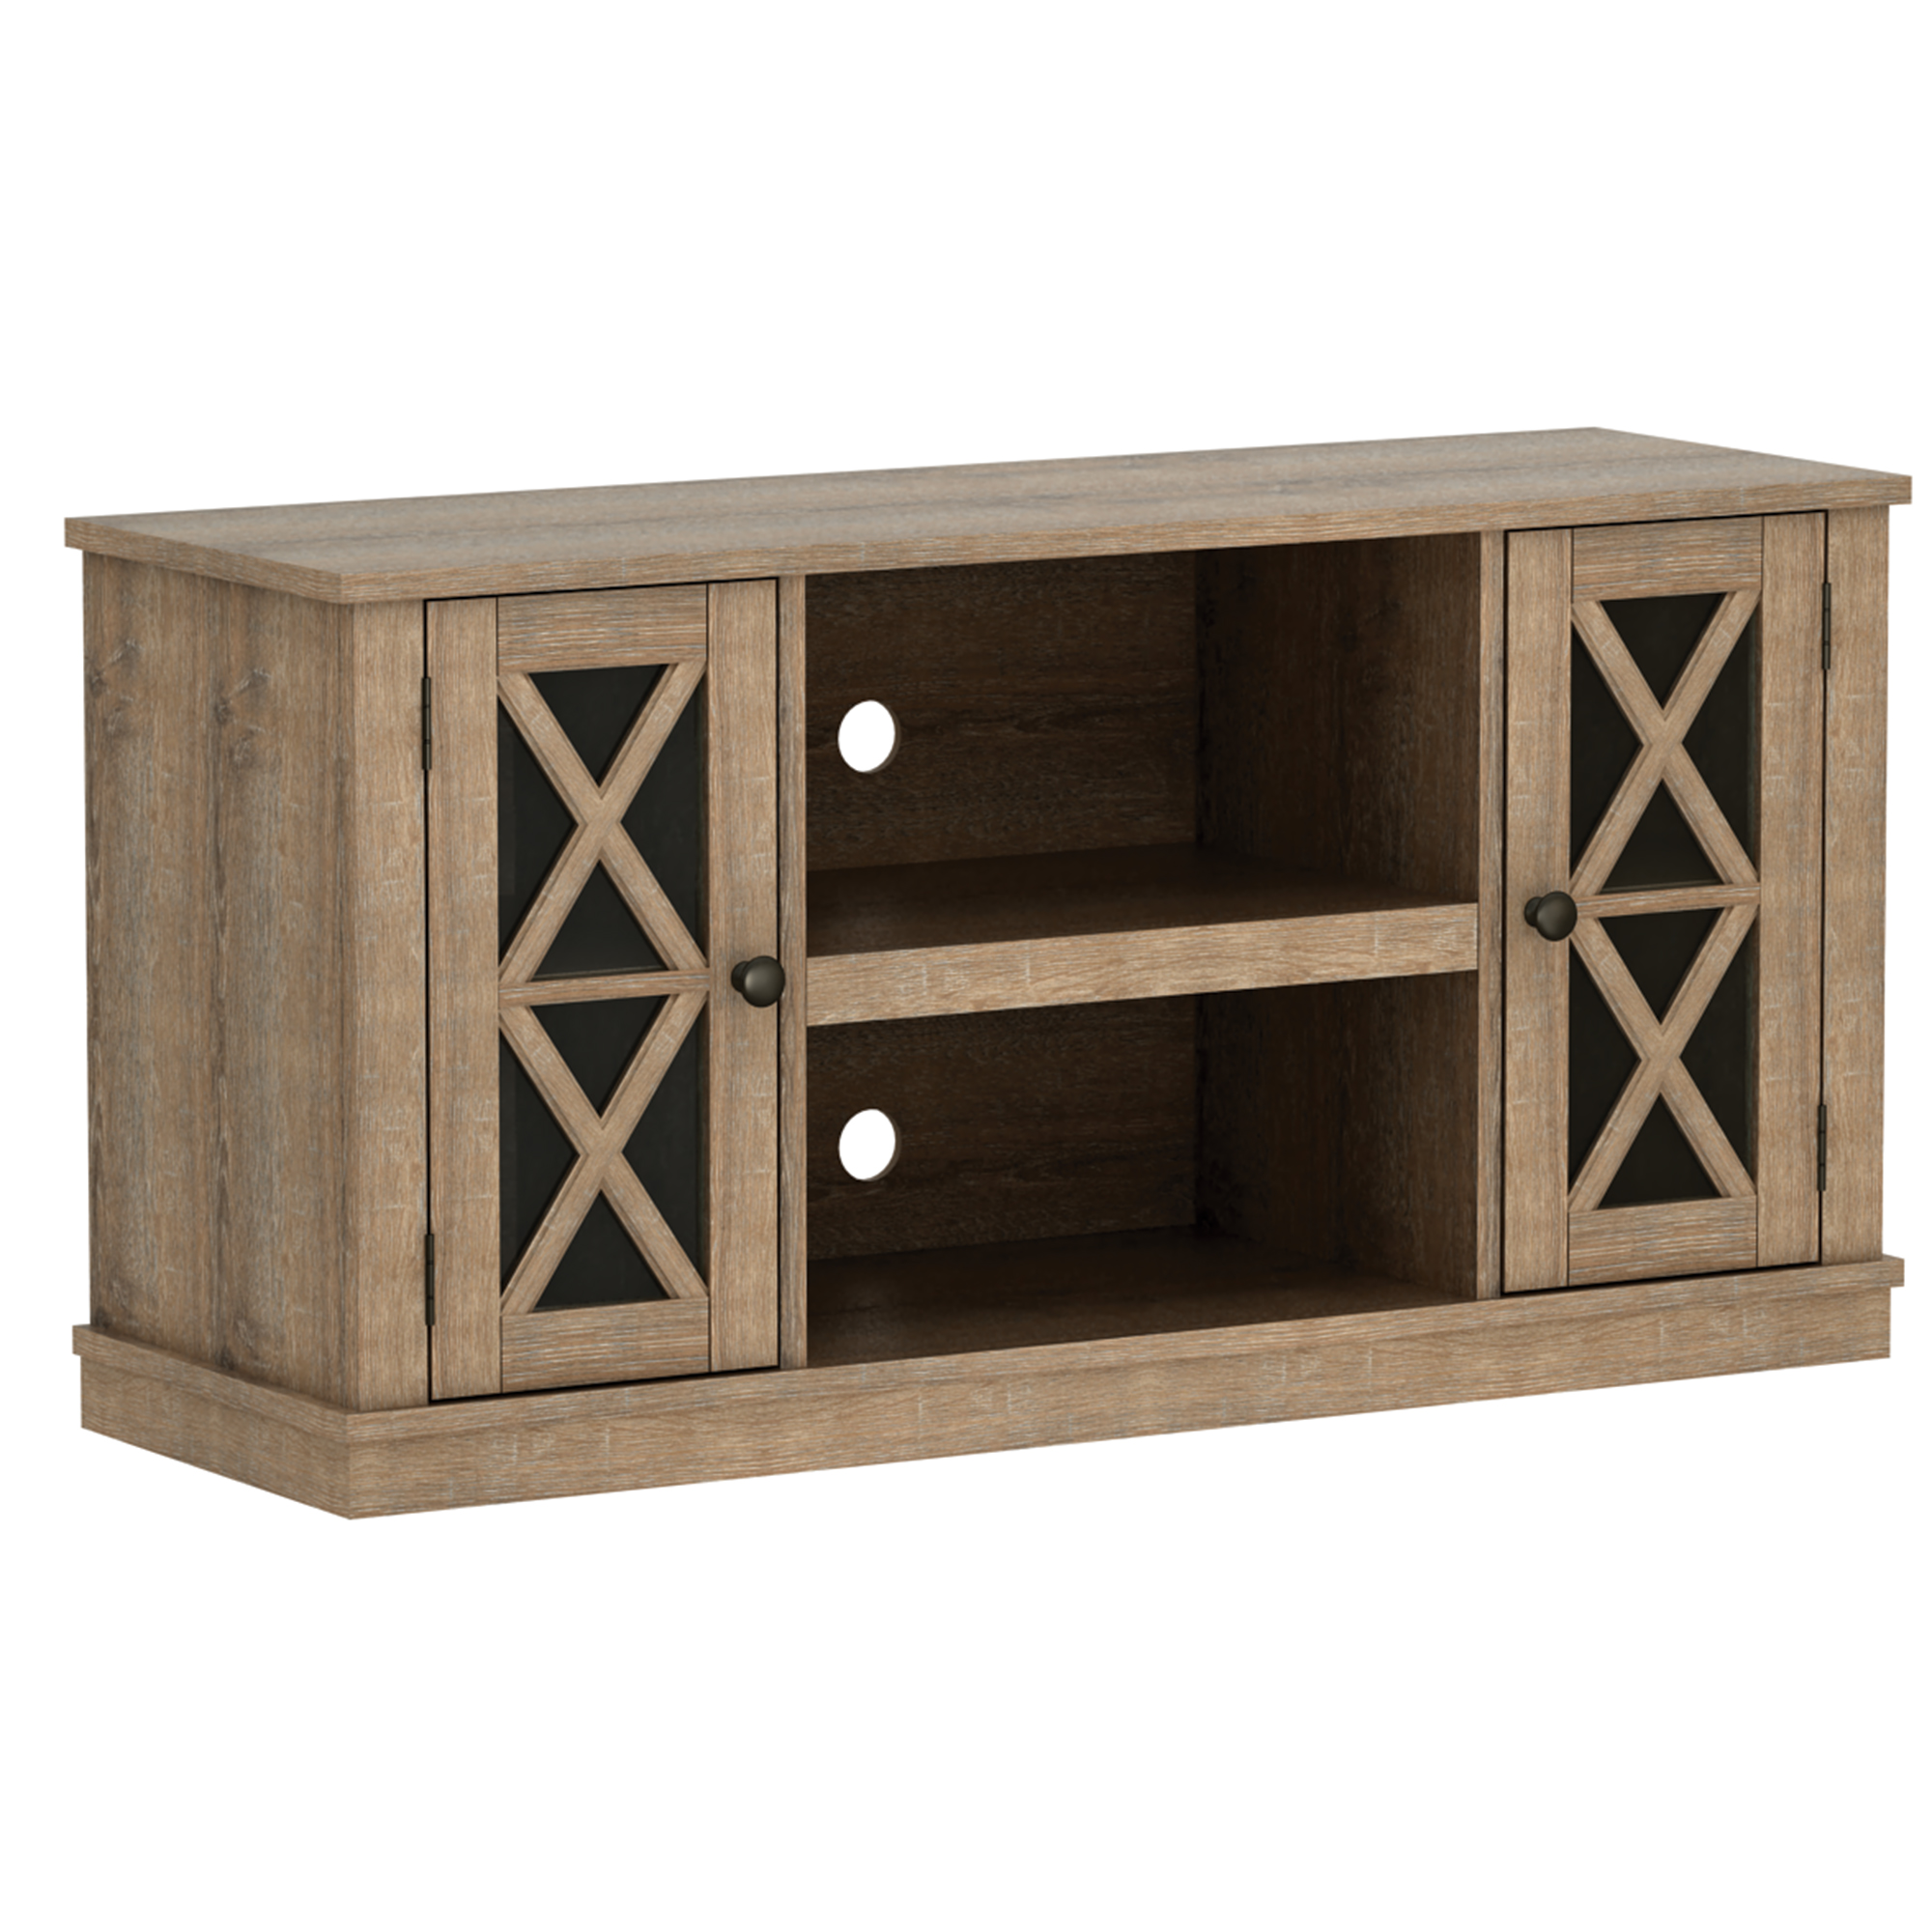 Twin Star Luxe Stanton Ridge TV Stand for TVs up to 55", Oak - image 5 of 8